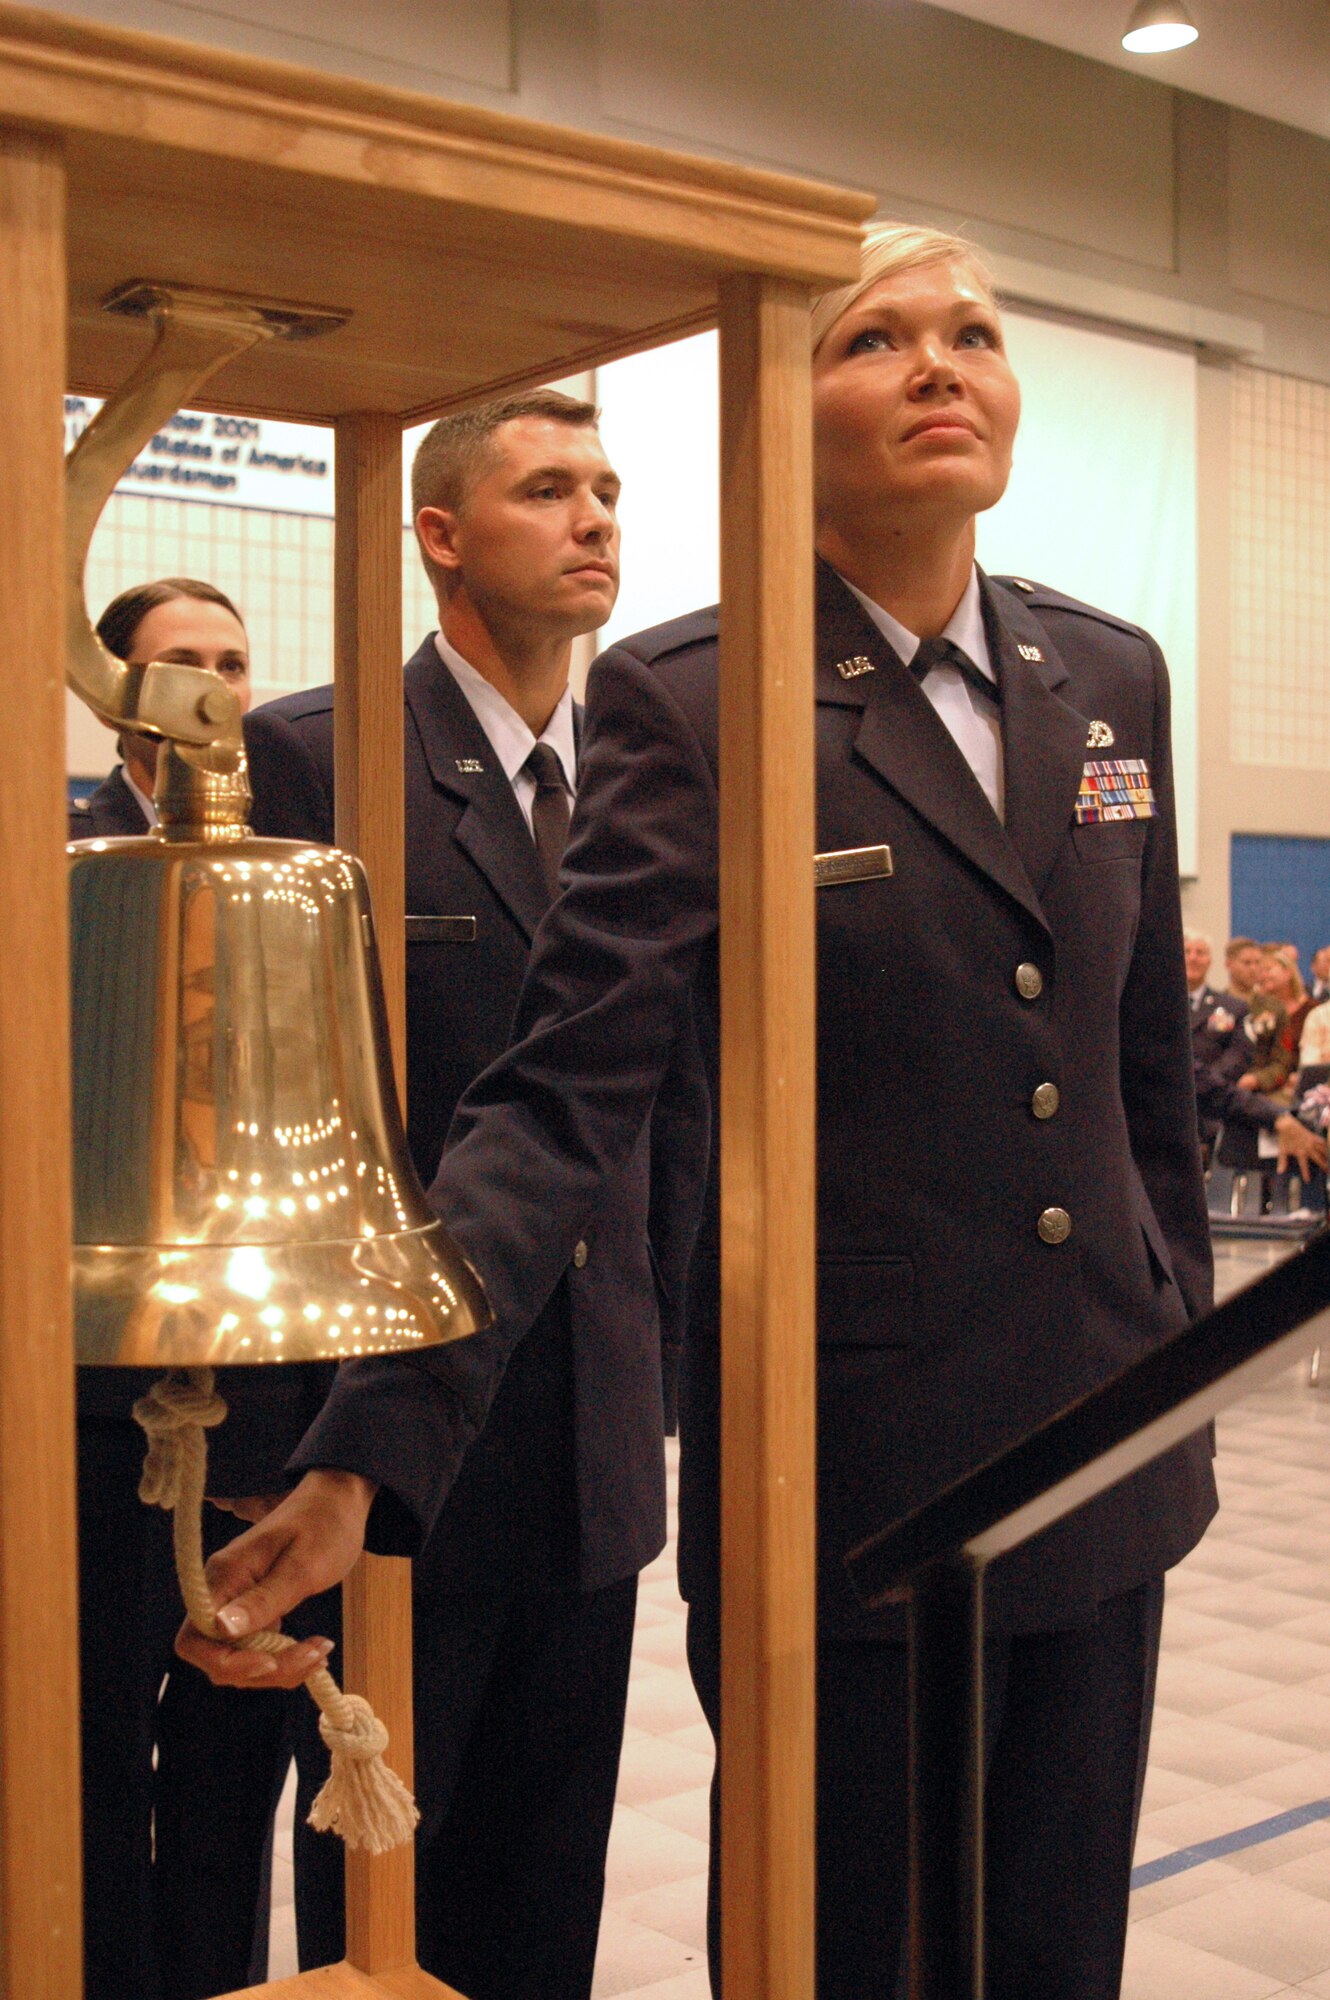 New 2nd Lt. Teah Johnson rings the commissioning bell during her graduation from the Academy of Military Science at the I.G. Brown Air National Guard Training and Education Center at McGhee Tyson Air National Guard Base, Tenn., on June 26, 2009. She will become a navigator on a C-130 cargo aircraft for the 182nd Airlift Wing of the Illinois Air National Guard. Officer candidates of class “O-2009-4,” who graduated today, are members of the last officer commissioning program class at TEC. (Photo by Master Sgt. Greg Rudl, National Guard Bureau)